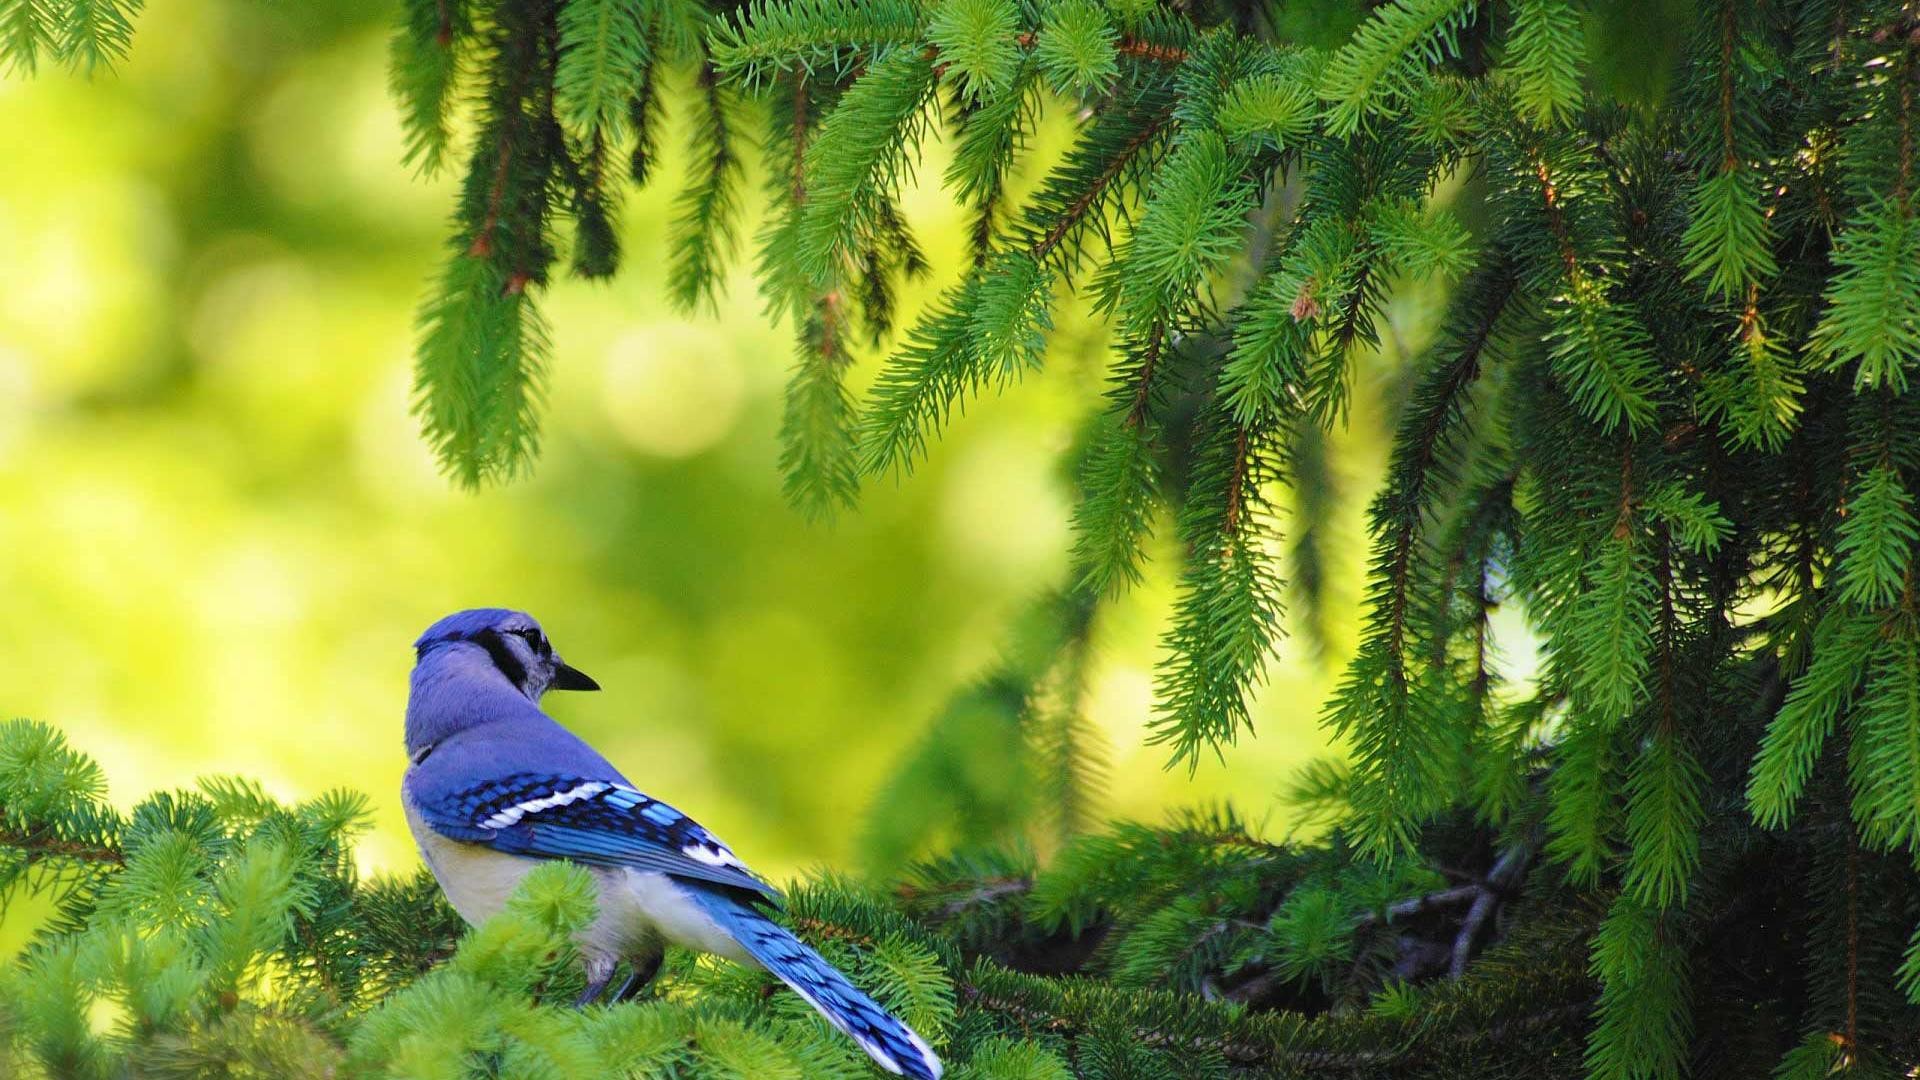 1920x1080  Green leaves and cute bird background wallpaper wide  wallpapers:1280x800,1440x900,1680x1050